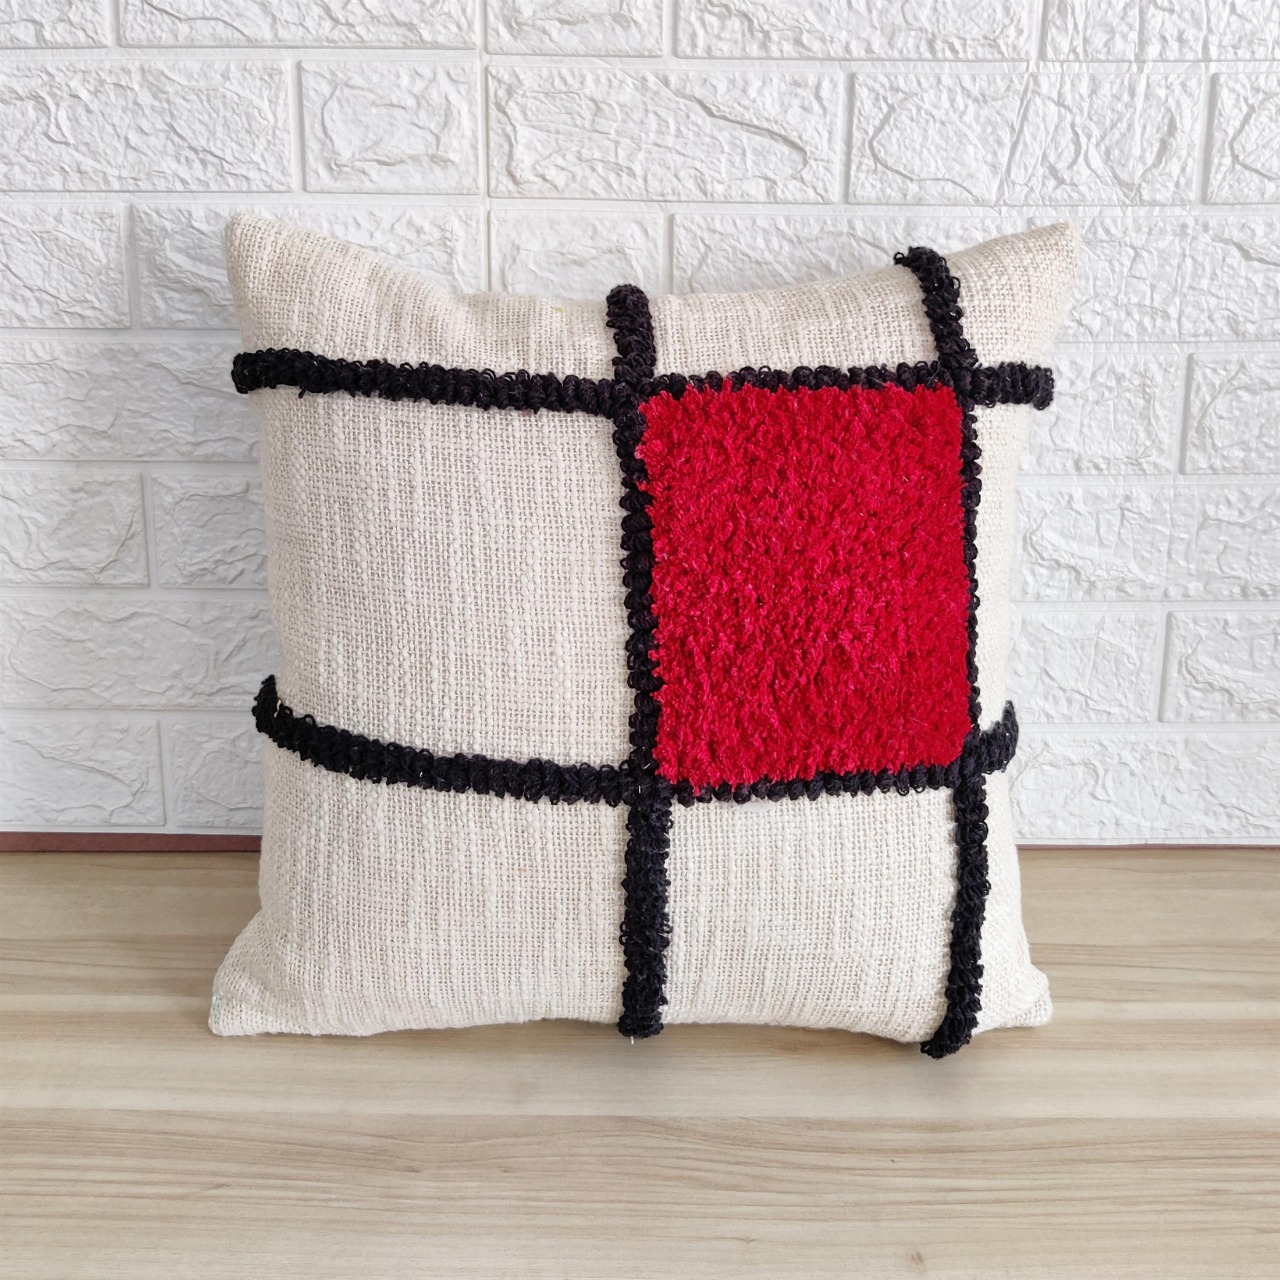 Ivory and Red tufted cotton cushion cover